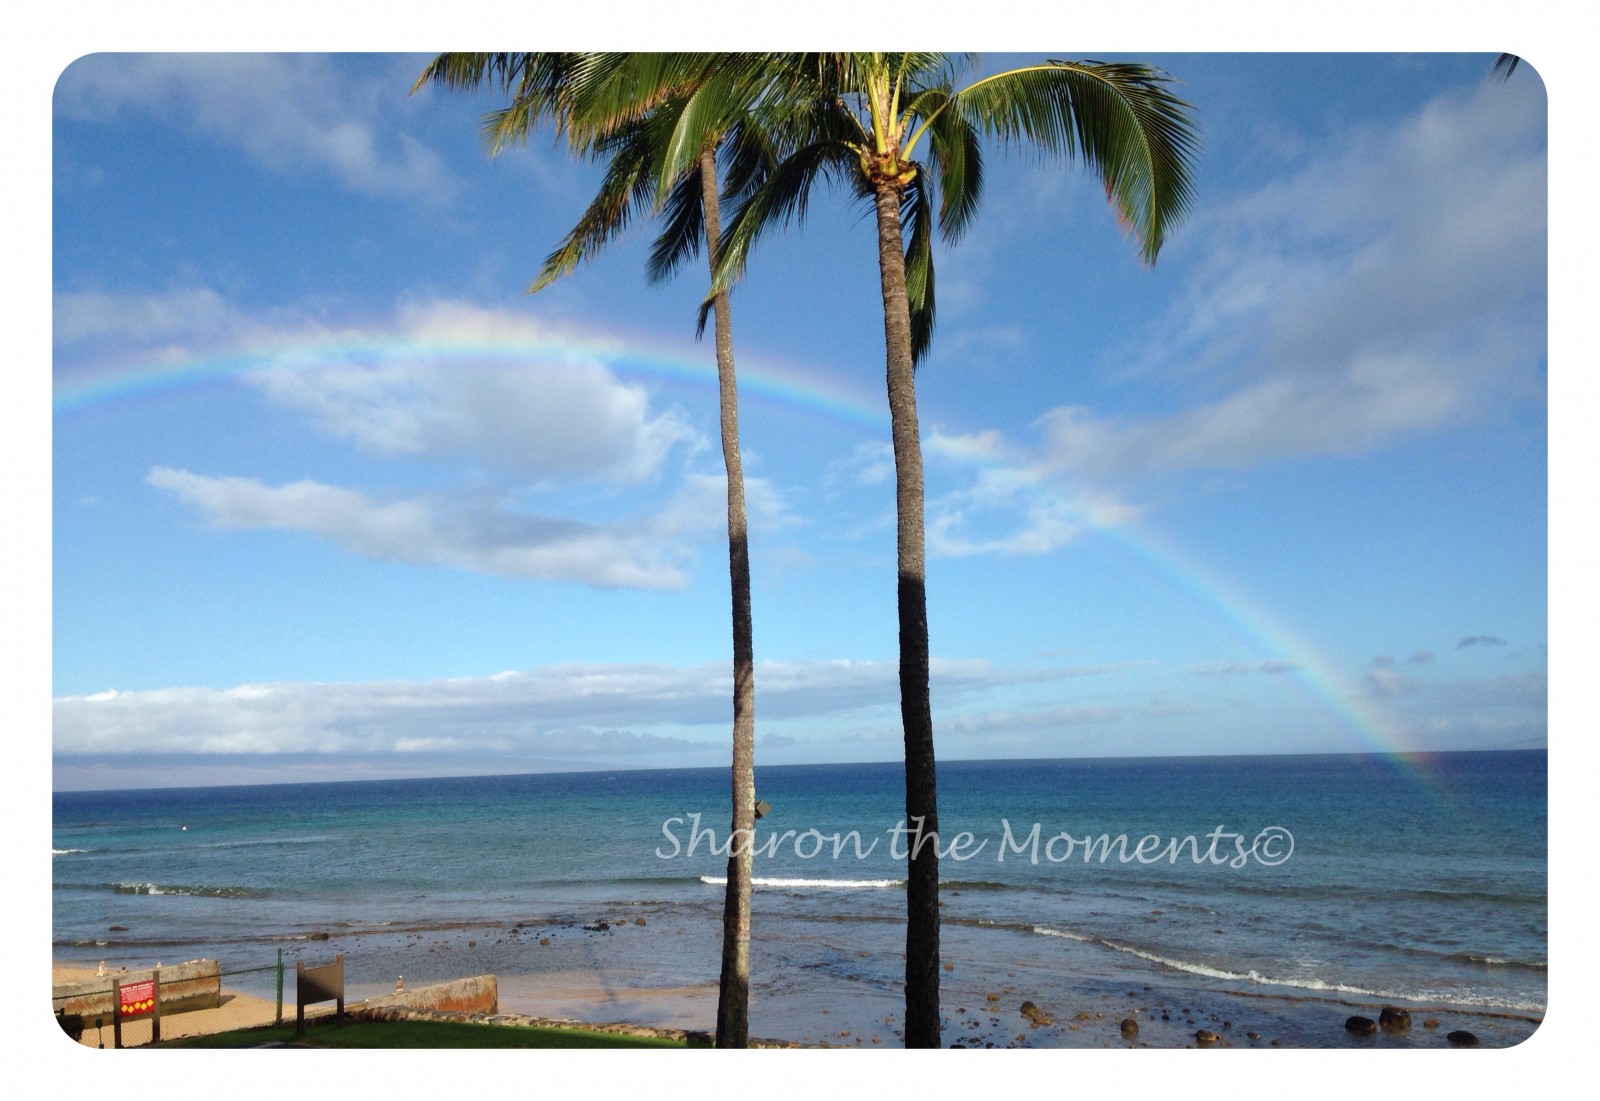 Papakea Resort in Maui Hawaii is Like Being Home| Sharon the Moments Blog